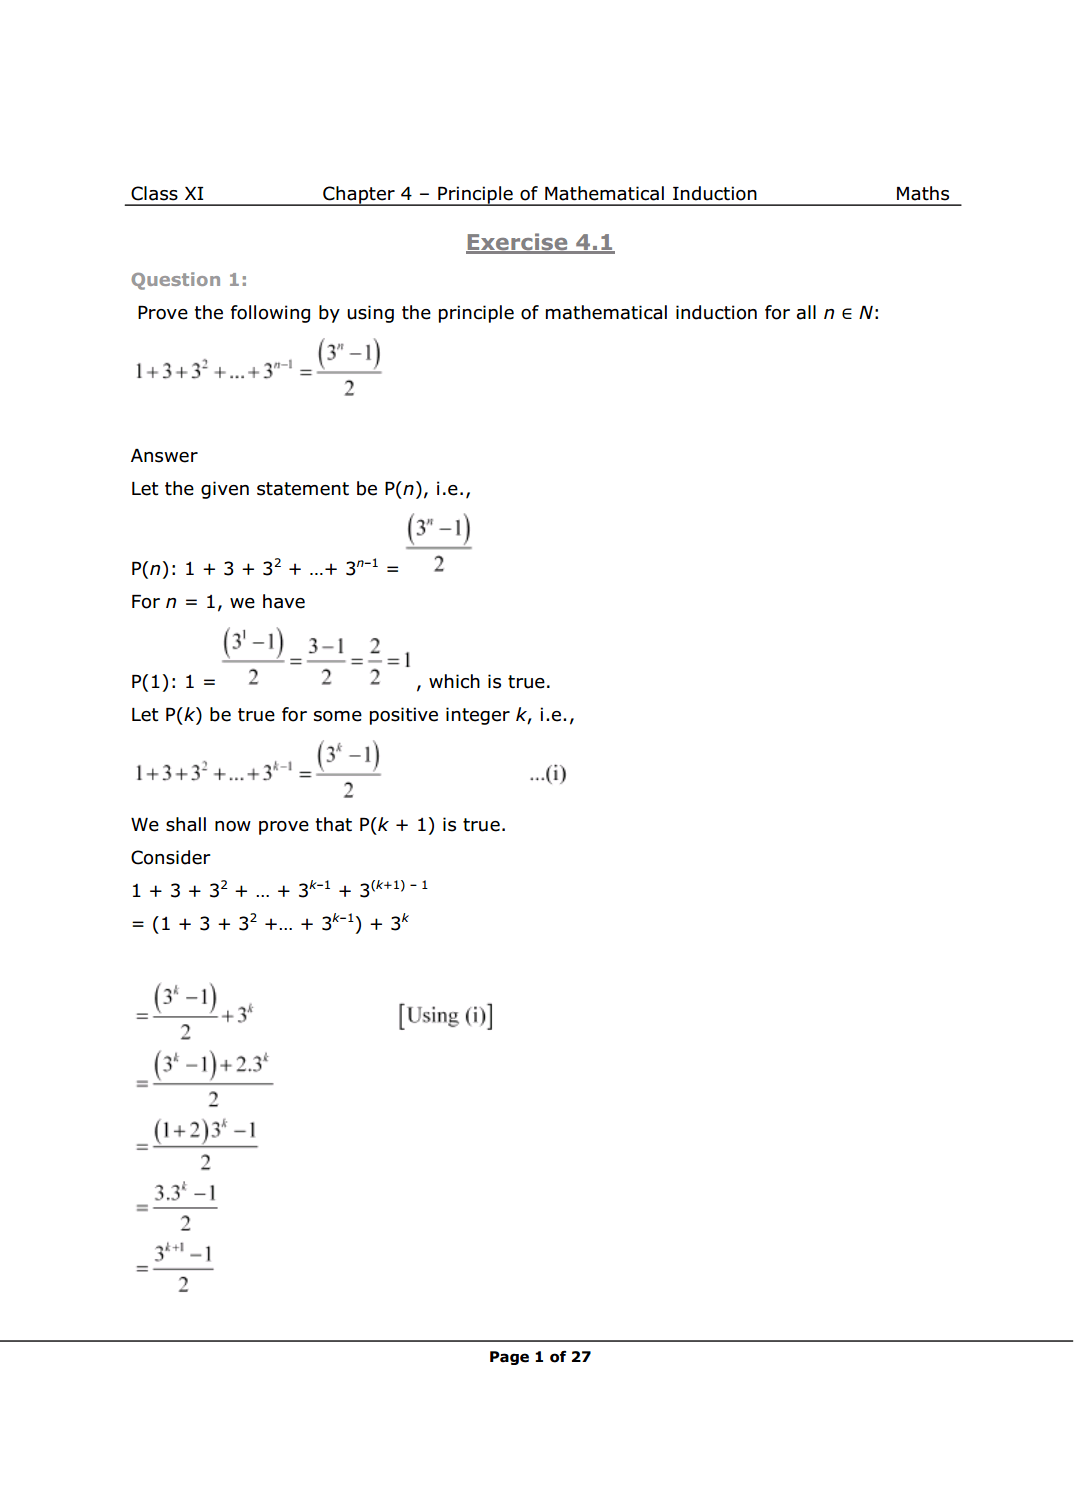 Class 11 Maths Chapter 4 Exercise 4.1 Solution Image 1